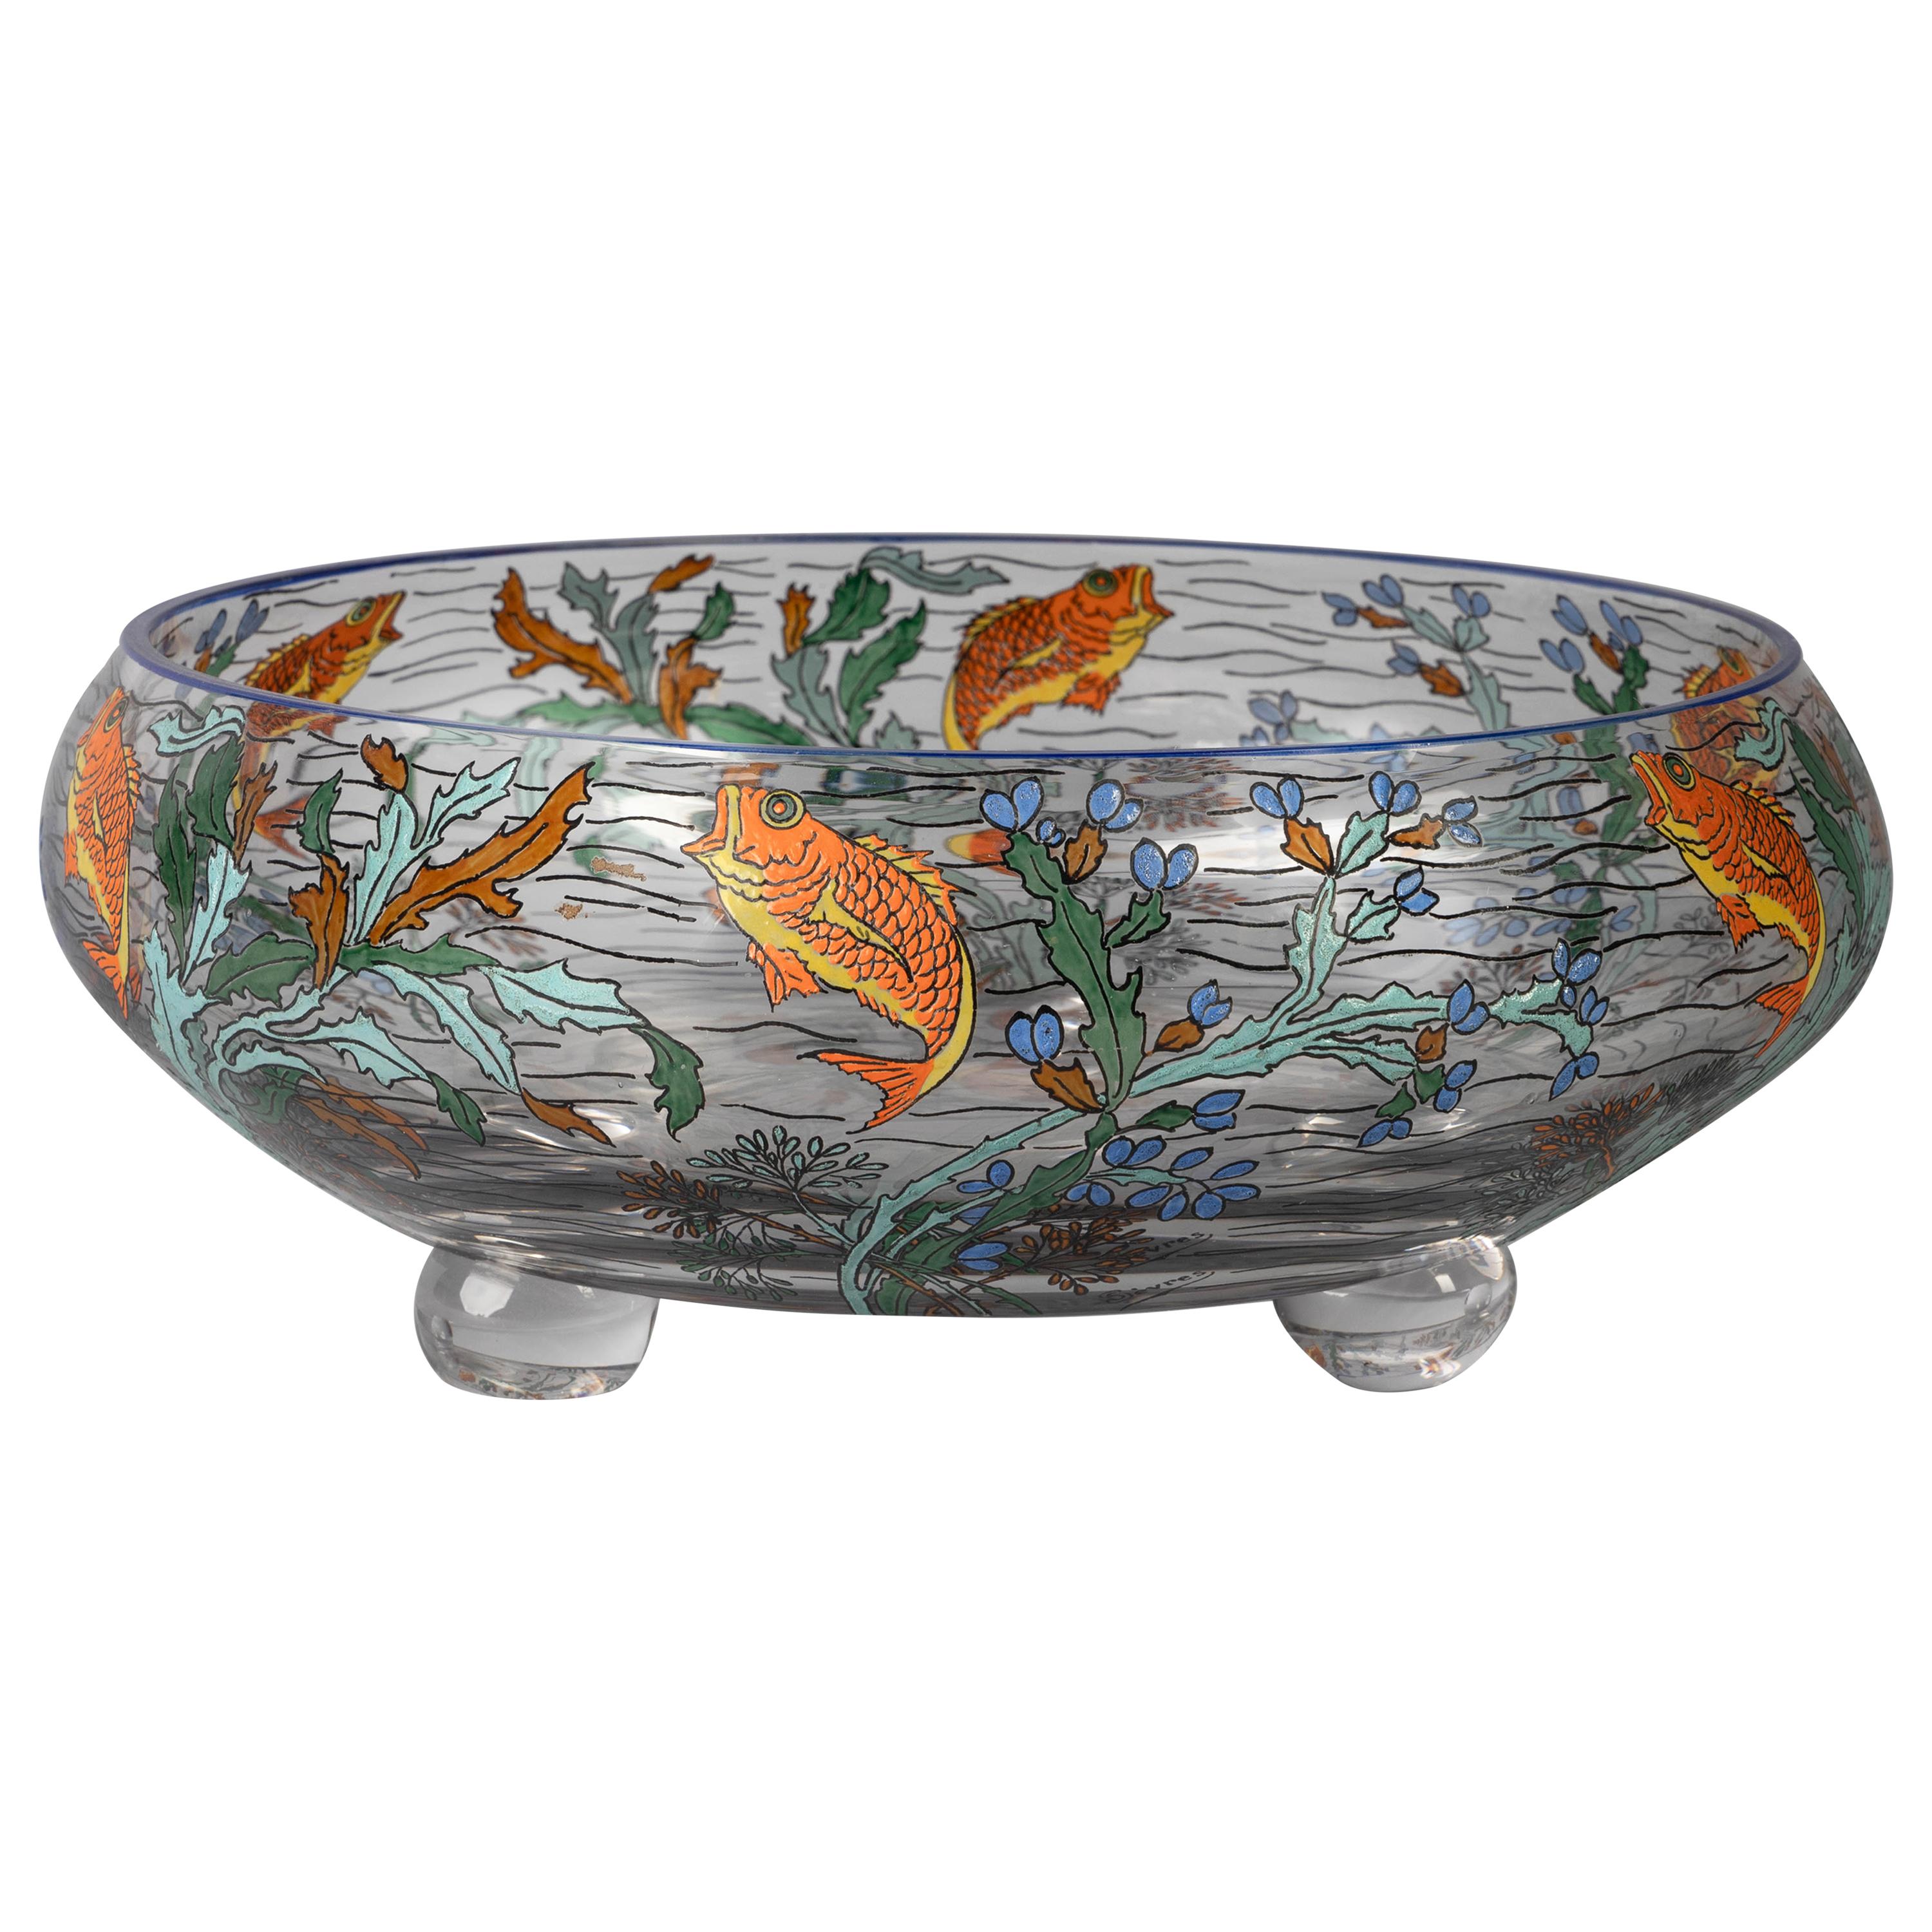 French Enameled Glass Footed Bowl, Sevres, circa 1930